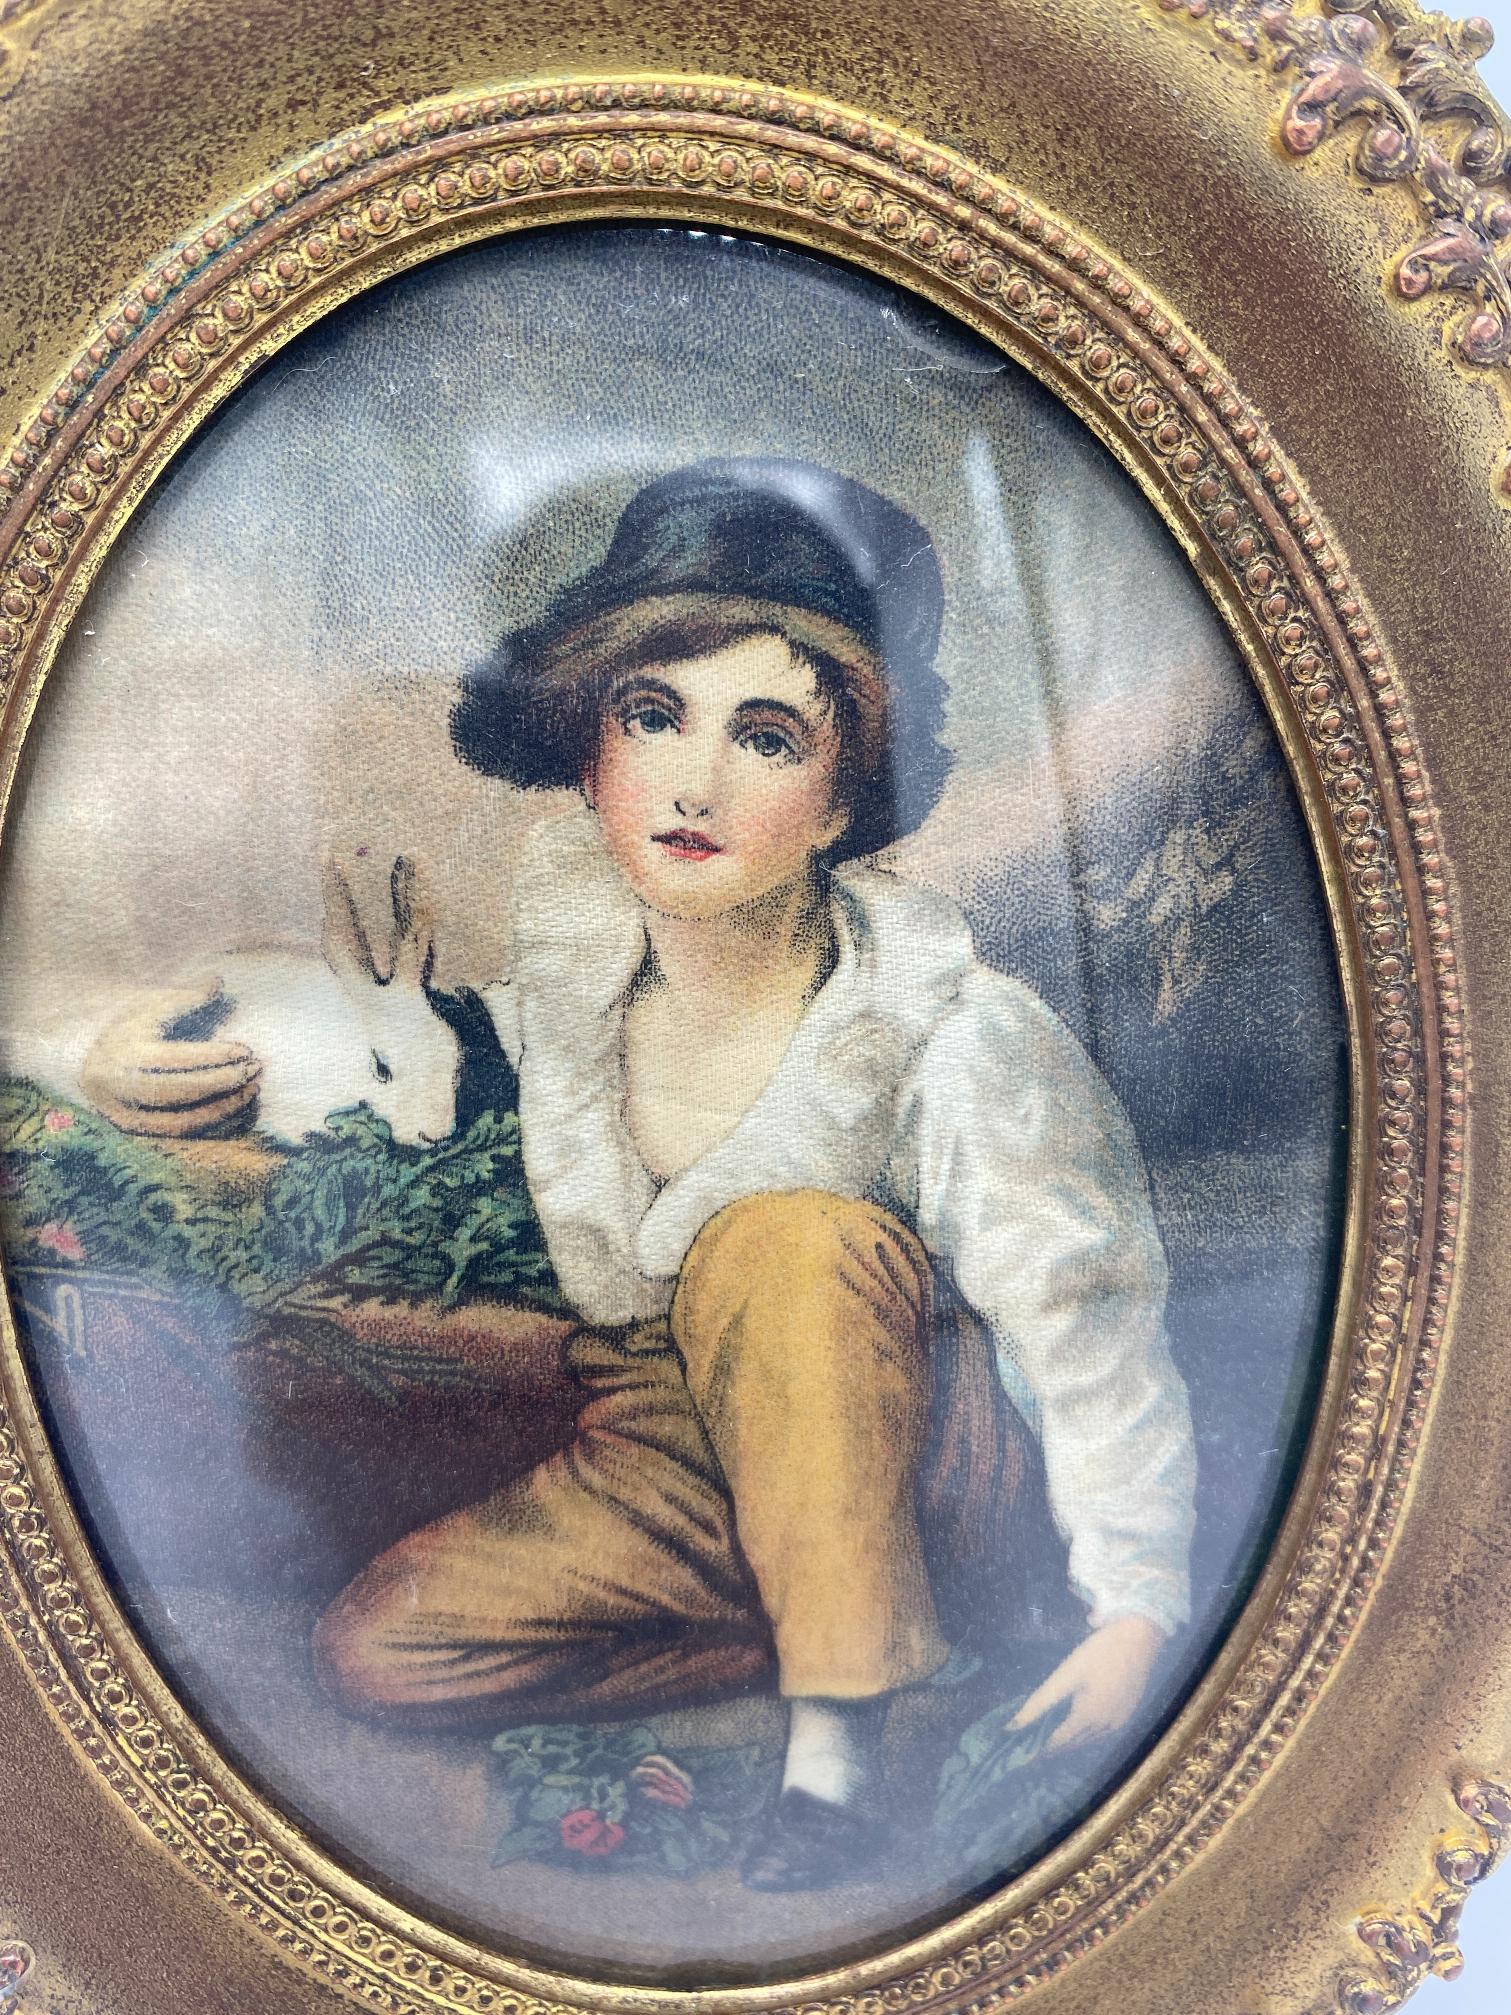 Small late 19th century silk painting depicting boy and rabbit in oval frame
Picture of a young boy with a rabbit and leafy vegetables painted on silk. Bowed glass has chip on edge. Gilt brass easel frame. Measures: 7